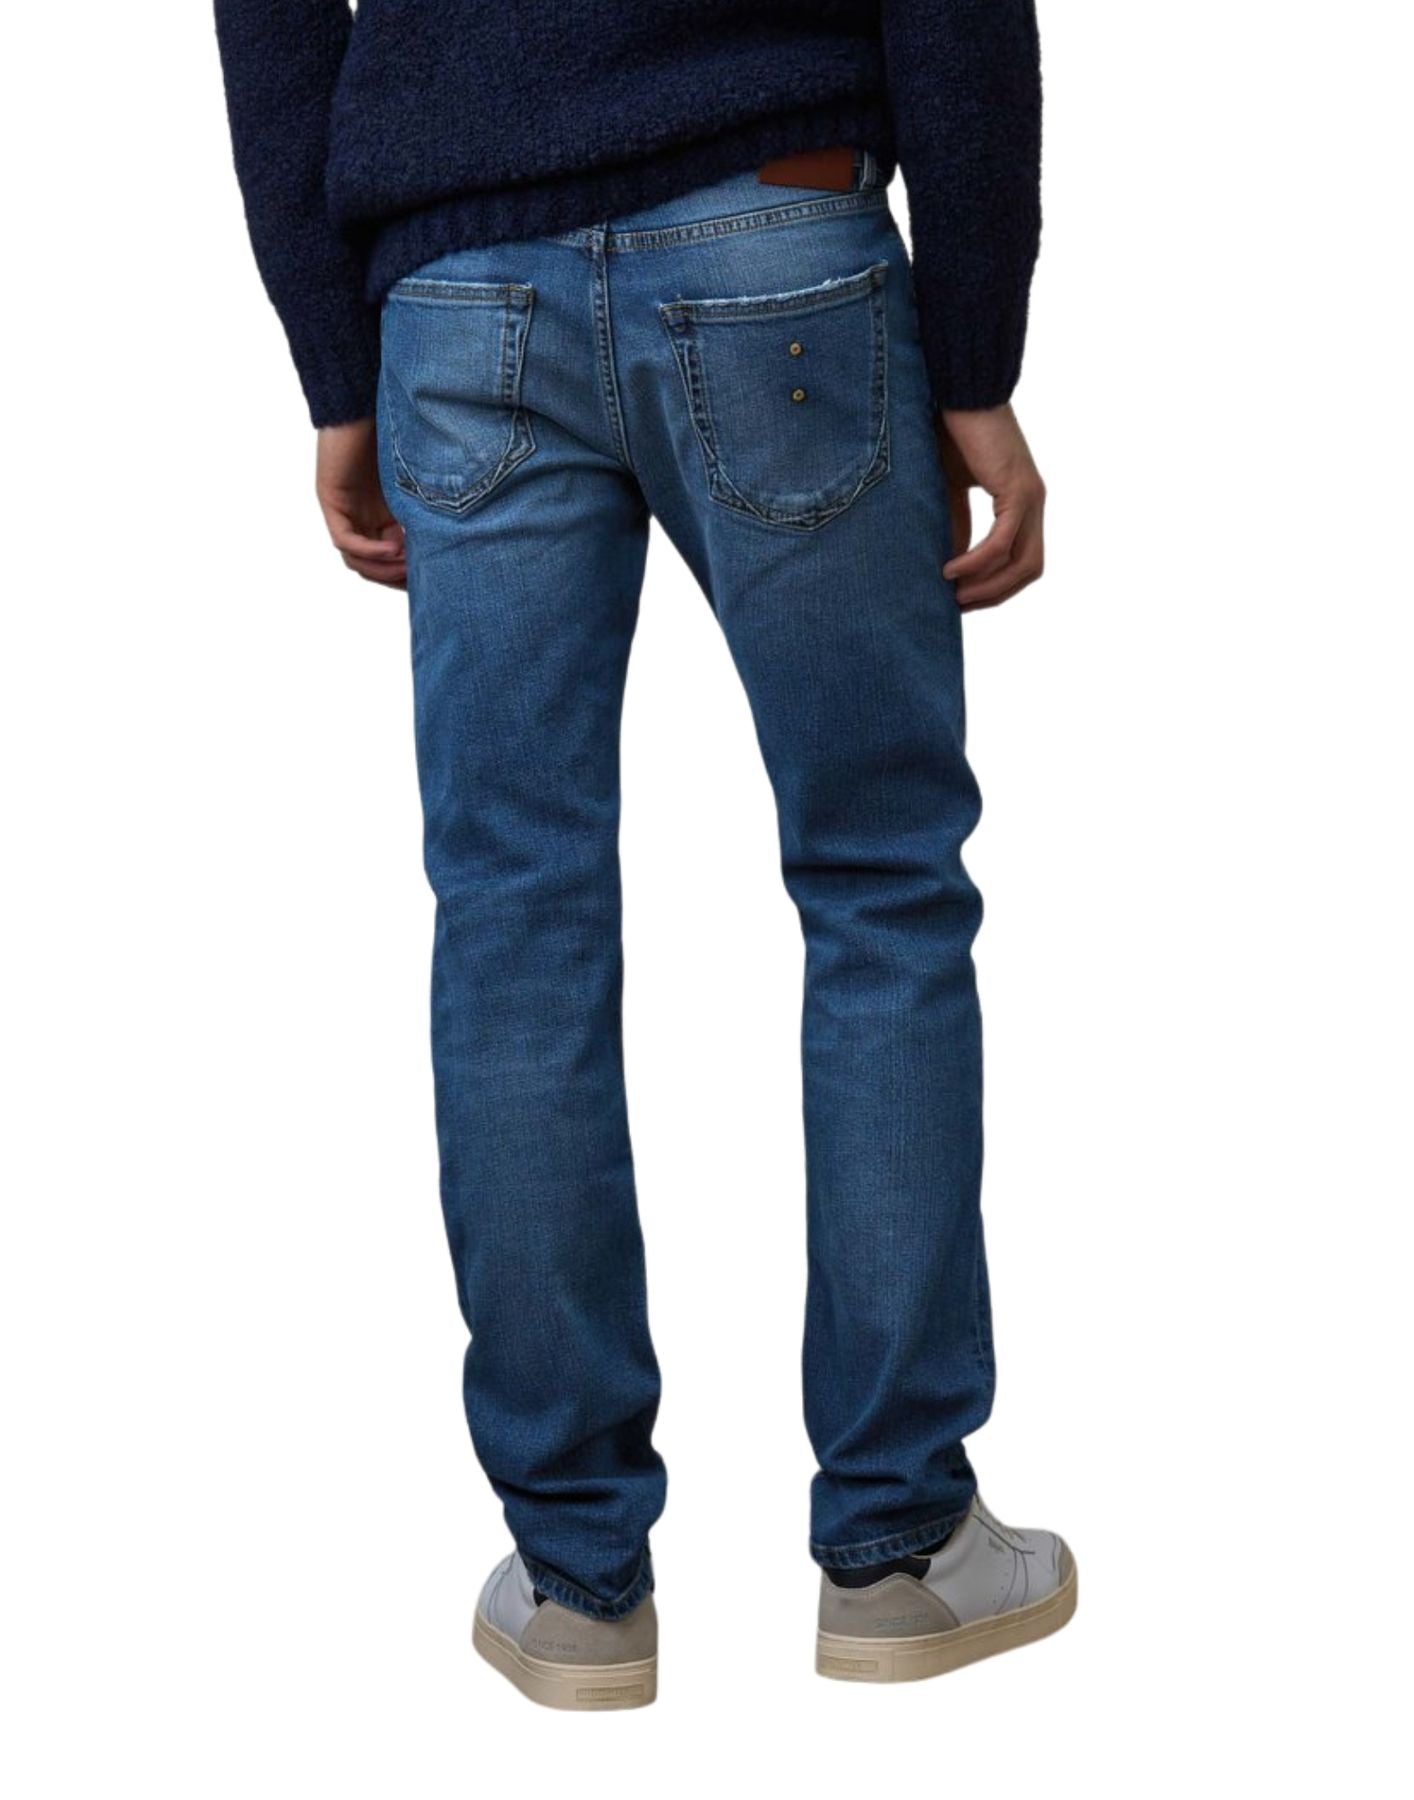 Jeans for man 24SBLUP03481 006873 D149 Blauer